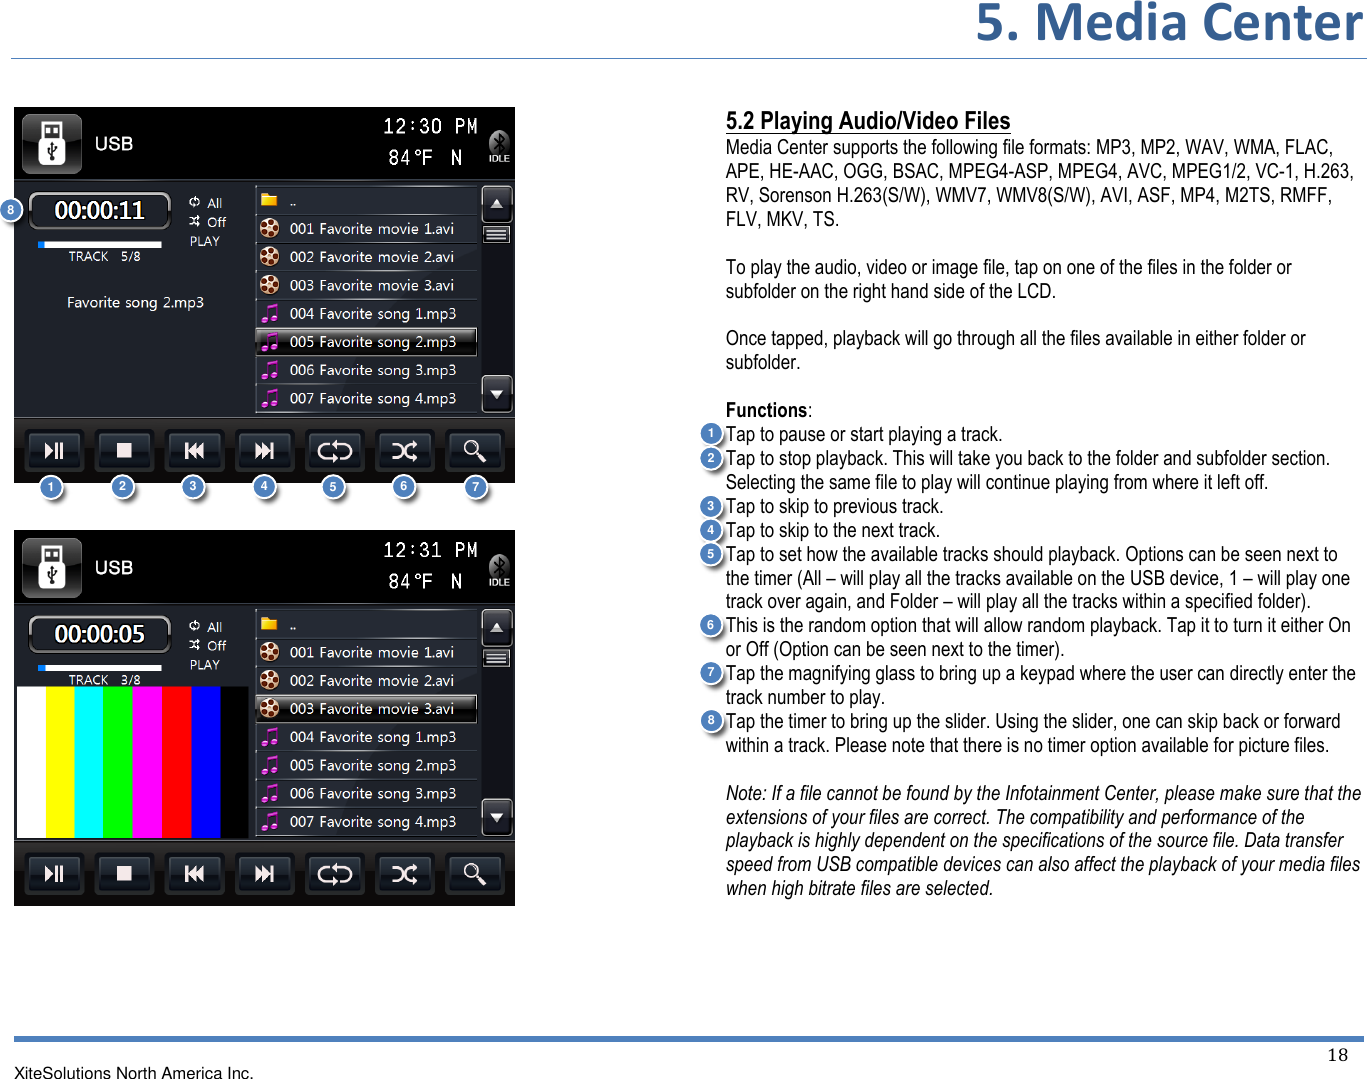 5. Media Center XiteSolutions North America Inc.  18             5.2 Playing Audio/Video Files Media Center supports the following file formats: MP3, MP2, WAV, WMA, FLAC, APE, HE-AAC, OGG, BSAC, MPEG4-ASP, MPEG4, AVC, MPEG1/2, VC-1, H.263, RV, Sorenson H.263(S/W), WMV7, WMV8(S/W), AVI, ASF, MP4, M2TS, RMFF, FLV, MKV, TS.  To play the audio, video or image file, tap on one of the files in the folder or subfolder on the right hand side of the LCD.  Once tapped, playback will go through all the files available in either folder or subfolder.  Functions: Tap to pause or start playing a track. Tap to stop playback. This will take you back to the folder and subfolder section. Selecting the same file to play will continue playing from where it left off. Tap to skip to previous track. Tap to skip to the next track. Tap to set how the available tracks should playback. Options can be seen next to the timer (All – will play all the tracks available on the USB device, 1 – will play one track over again, and Folder – will play all the tracks within a specified folder). This is the random option that will allow random playback. Tap it to turn it either On or Off (Option can be seen next to the timer). Tap the magnifying glass to bring up a keypad where the user can directly enter the track number to play. Tap the timer to bring up the slider. Using the slider, one can skip back or forward within a track. Please note that there is no timer option available for picture files.  Note: If a file cannot be found by the Infotainment Center, please make sure that the extensions of your files are correct. The compatibility and performance of the playback is highly dependent on the specifications of the source file. Data transfer speed from USB compatible devices can also affect the playback of your media files when high bitrate files are selected.     1 2 3 7 6 5 4 8 1 2 3 4 5 6 7 8 